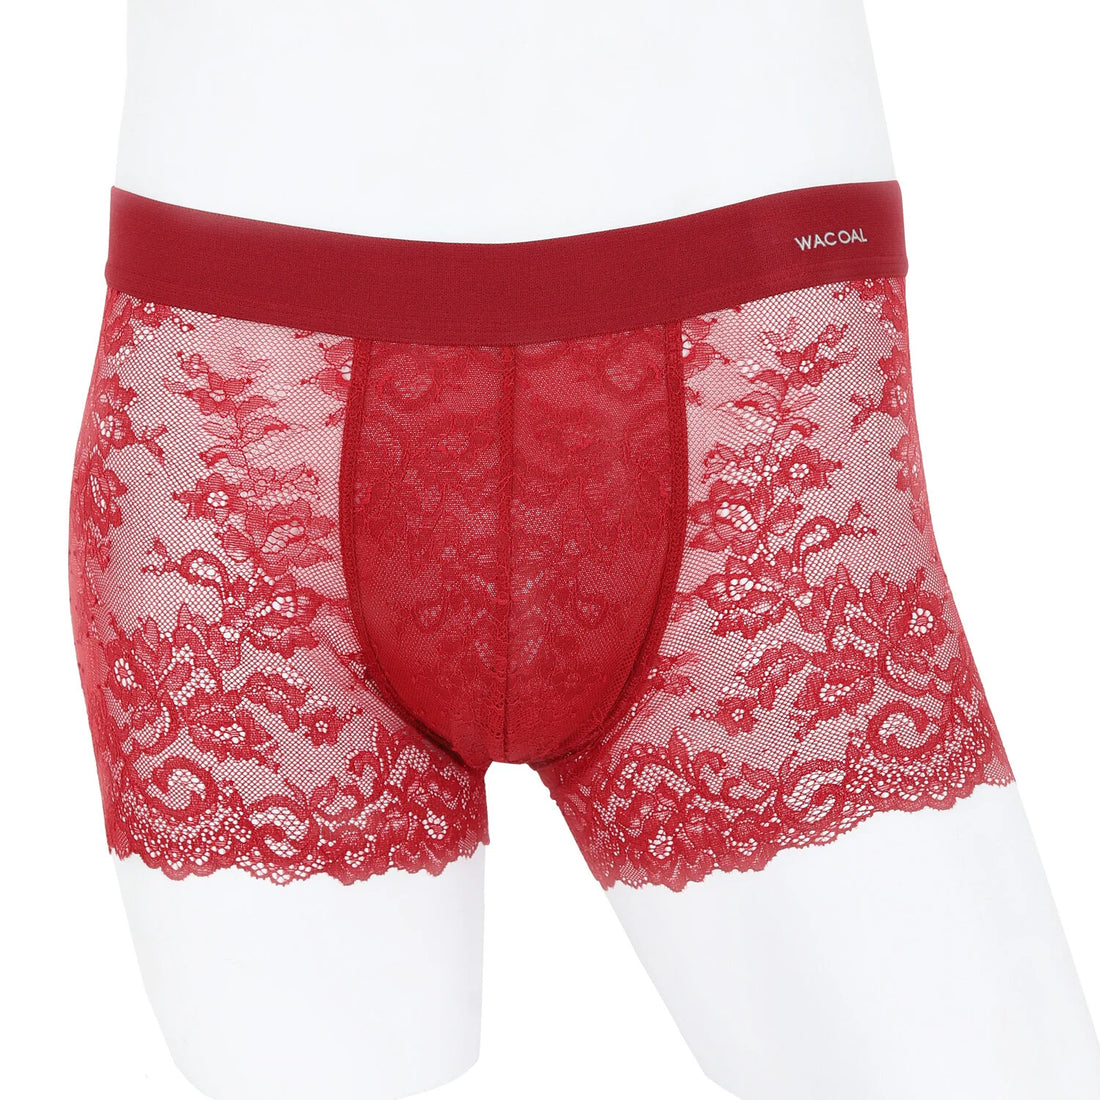 Soft mens pink lace underwear For Comfort 